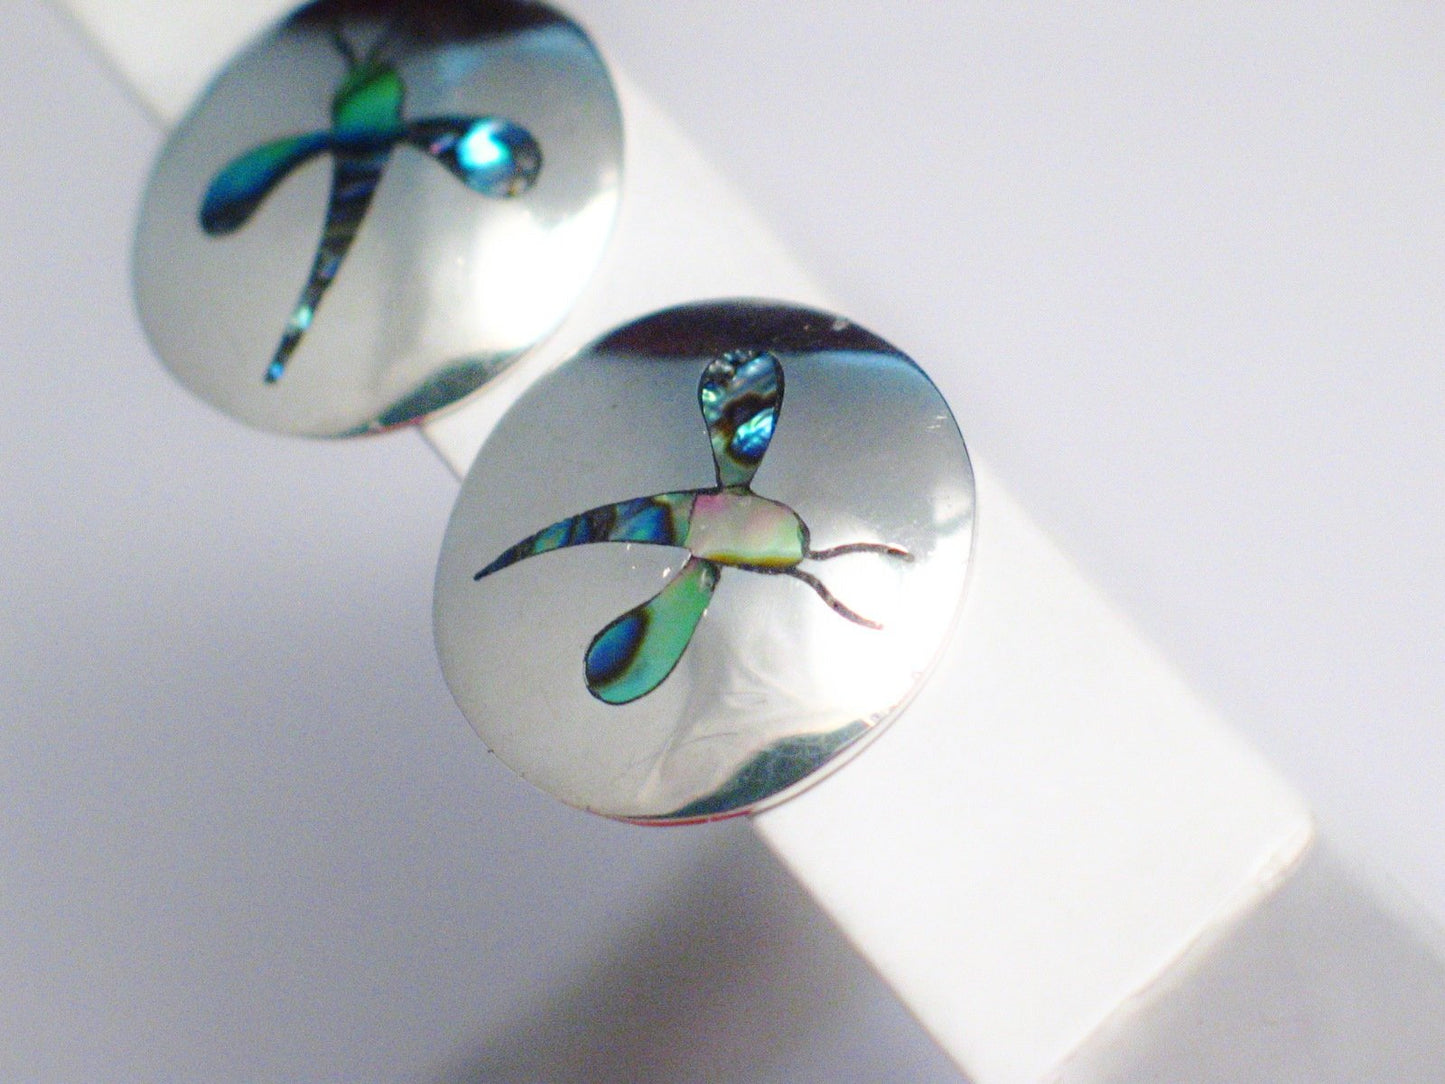 Clip-on Earrings, Sterling Silver Abalone Dragonfly Design Button Style Circle Earrings